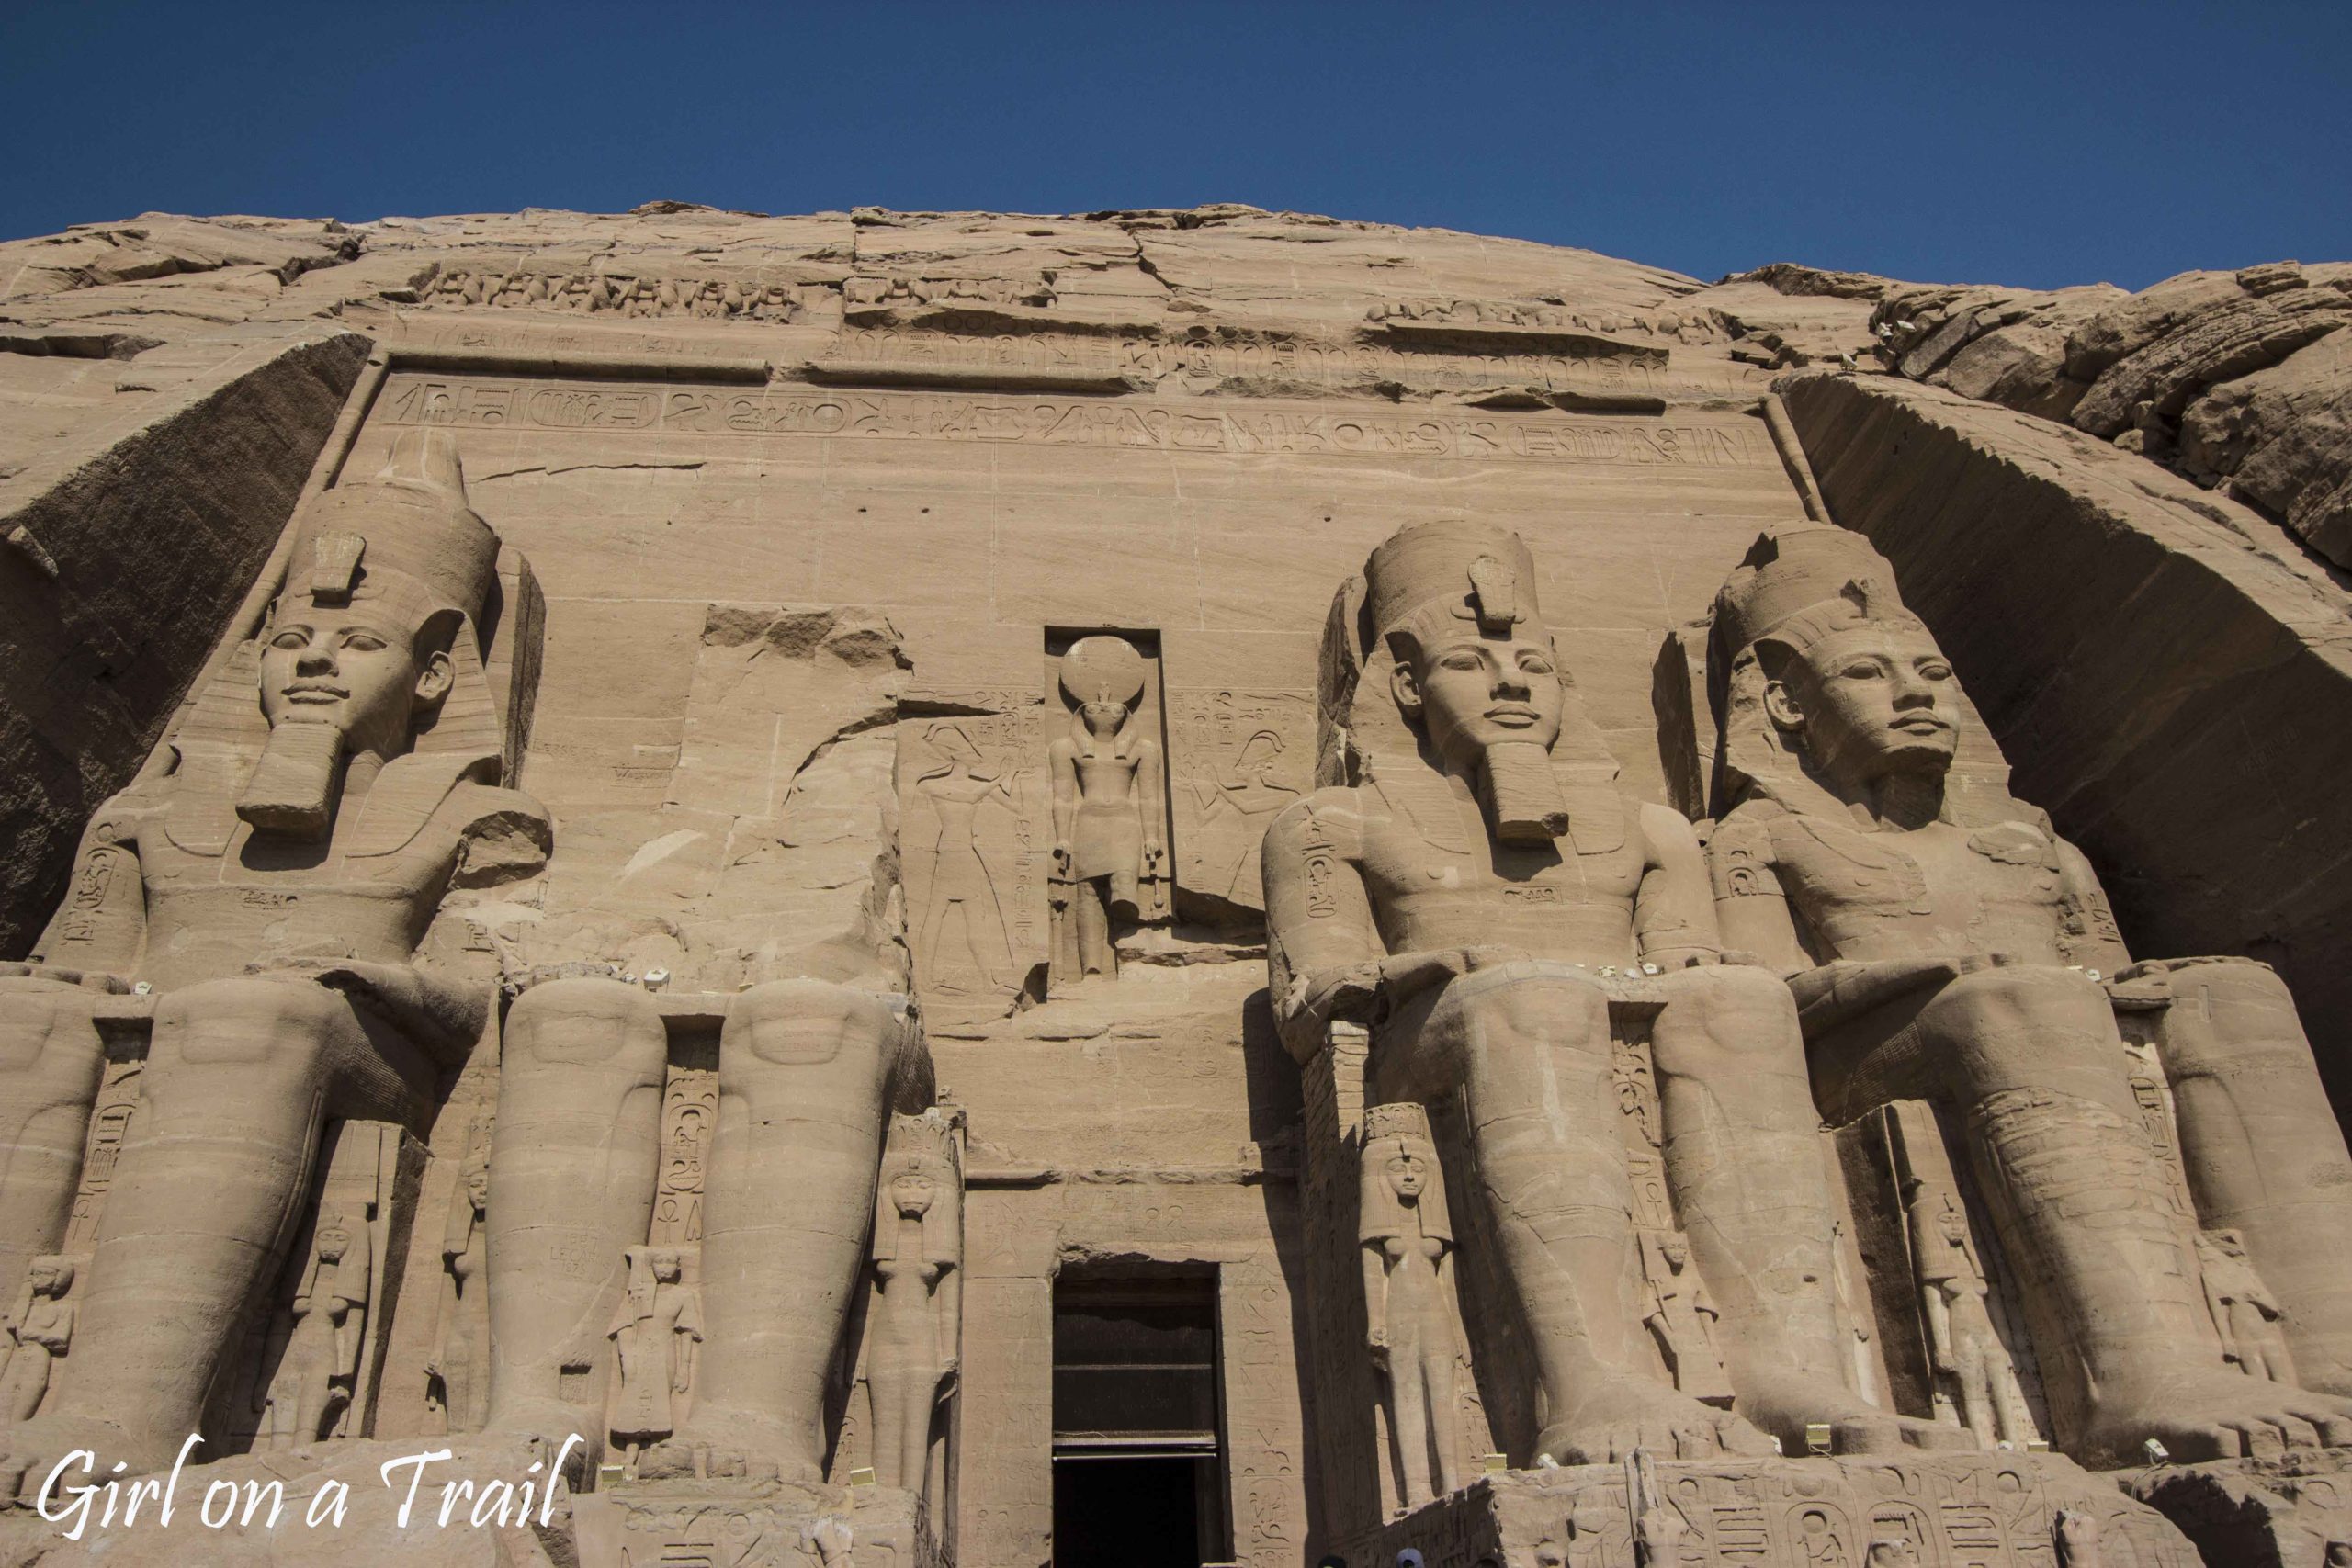 Abu Simbel – Egypt, buried temples and mirage